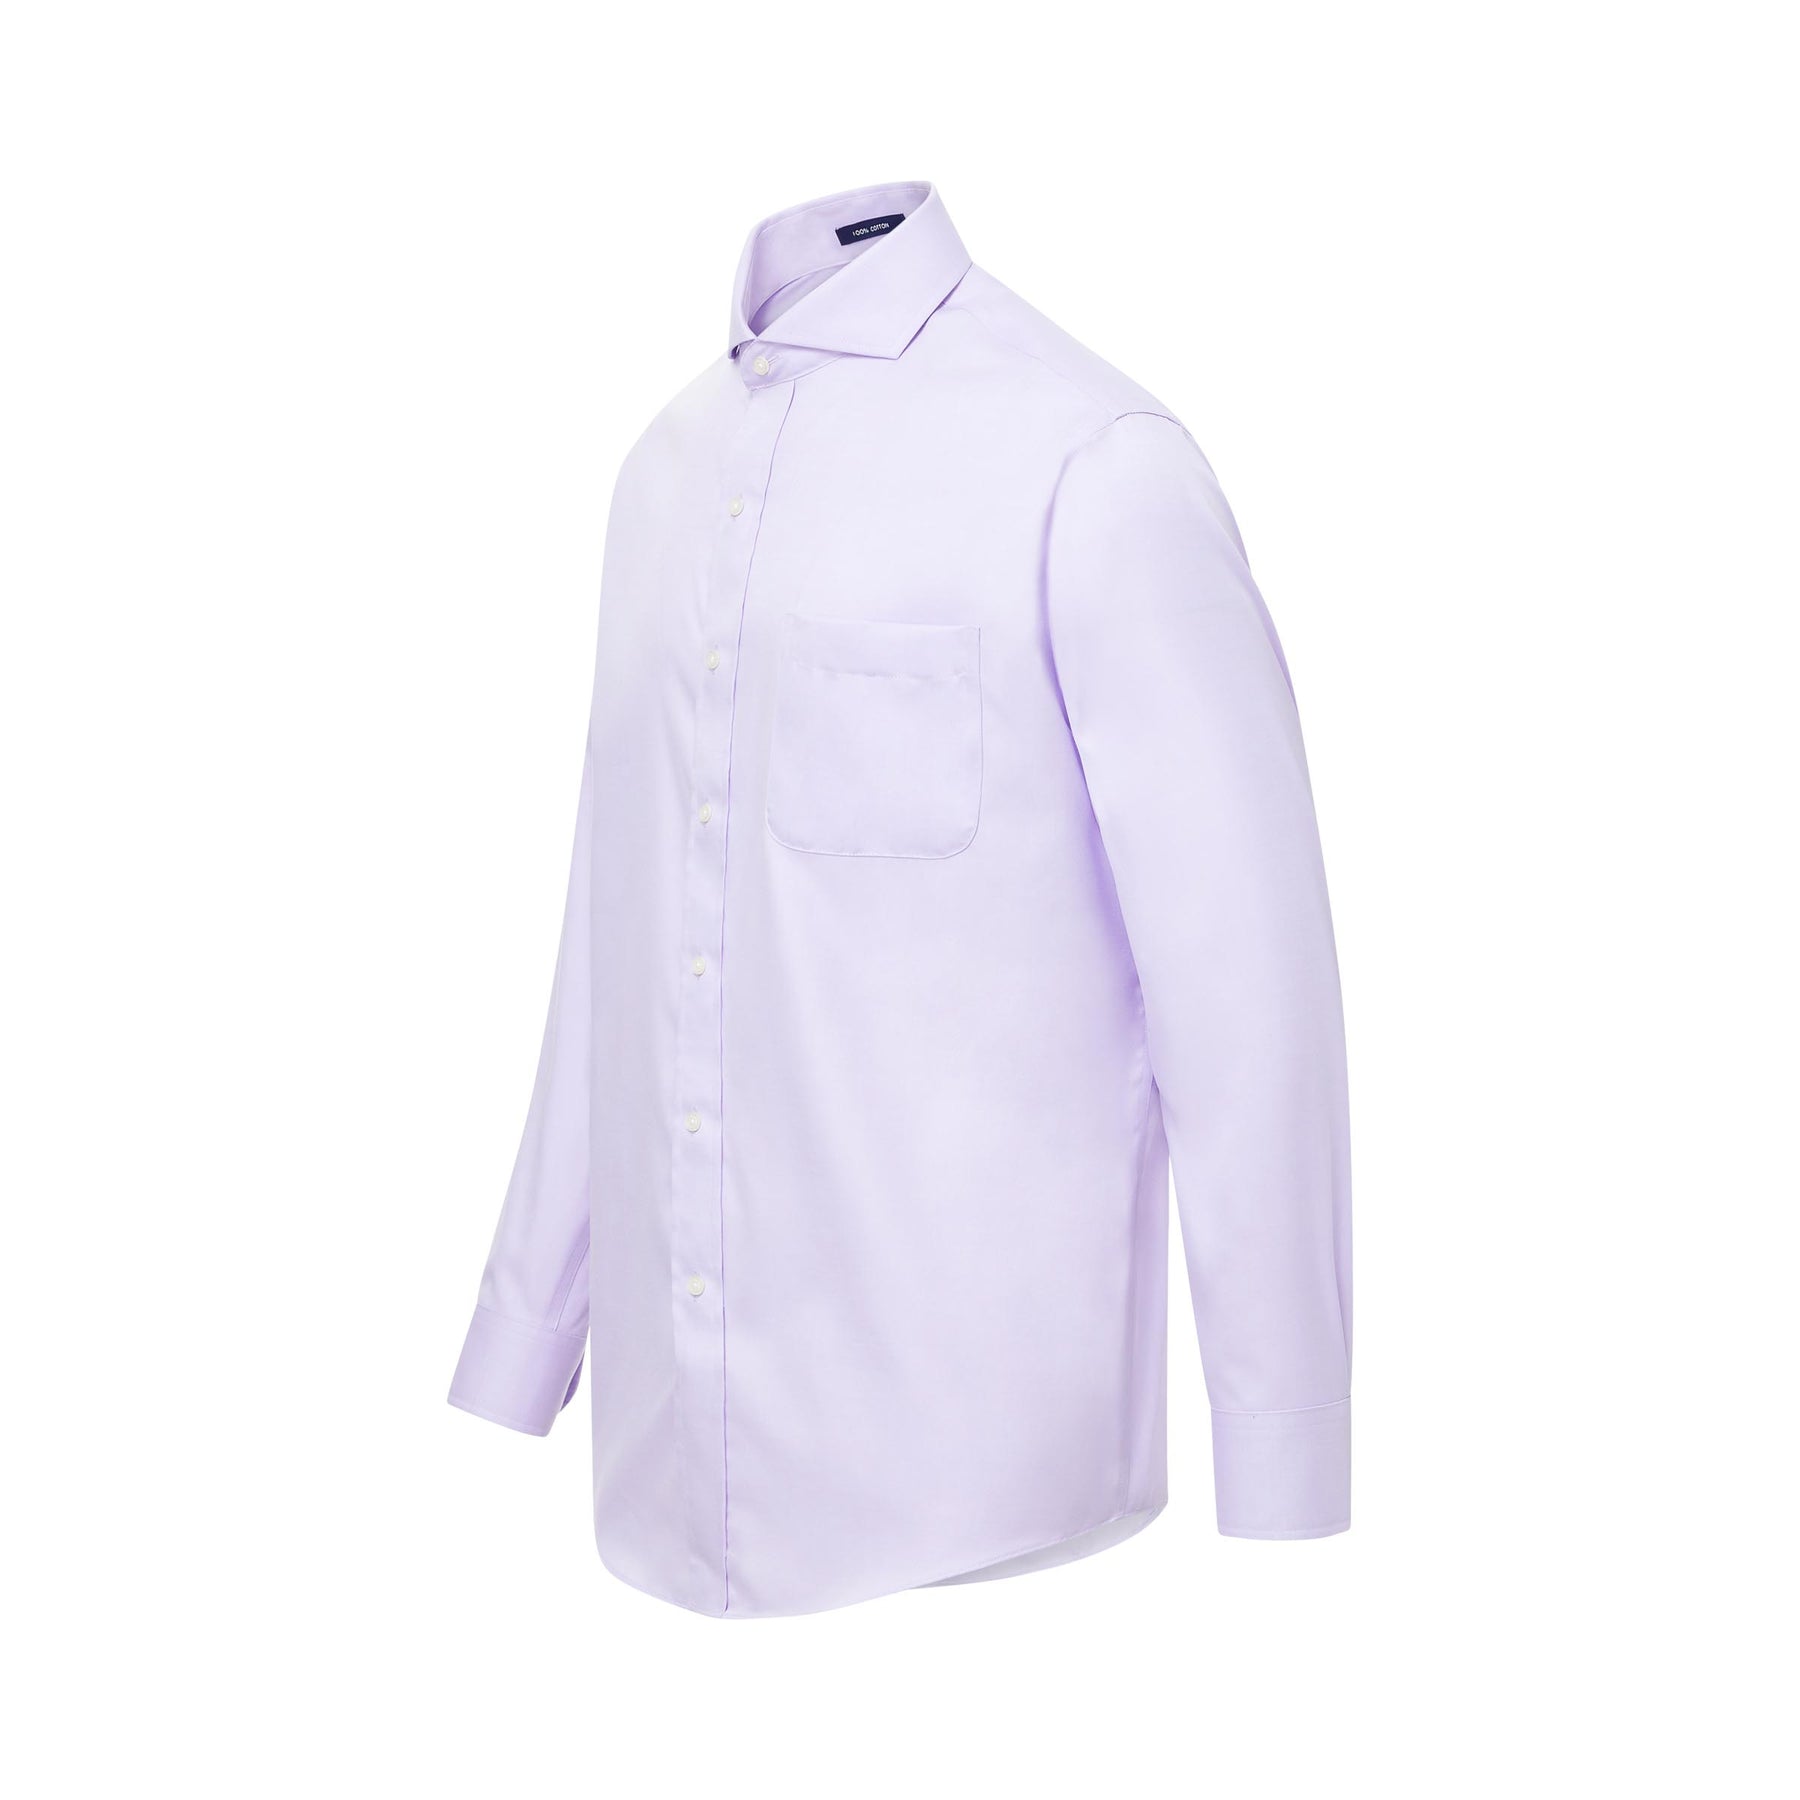 Long Sleeve Lavender ‘Bryant’ Shirt with Magnetic Closures